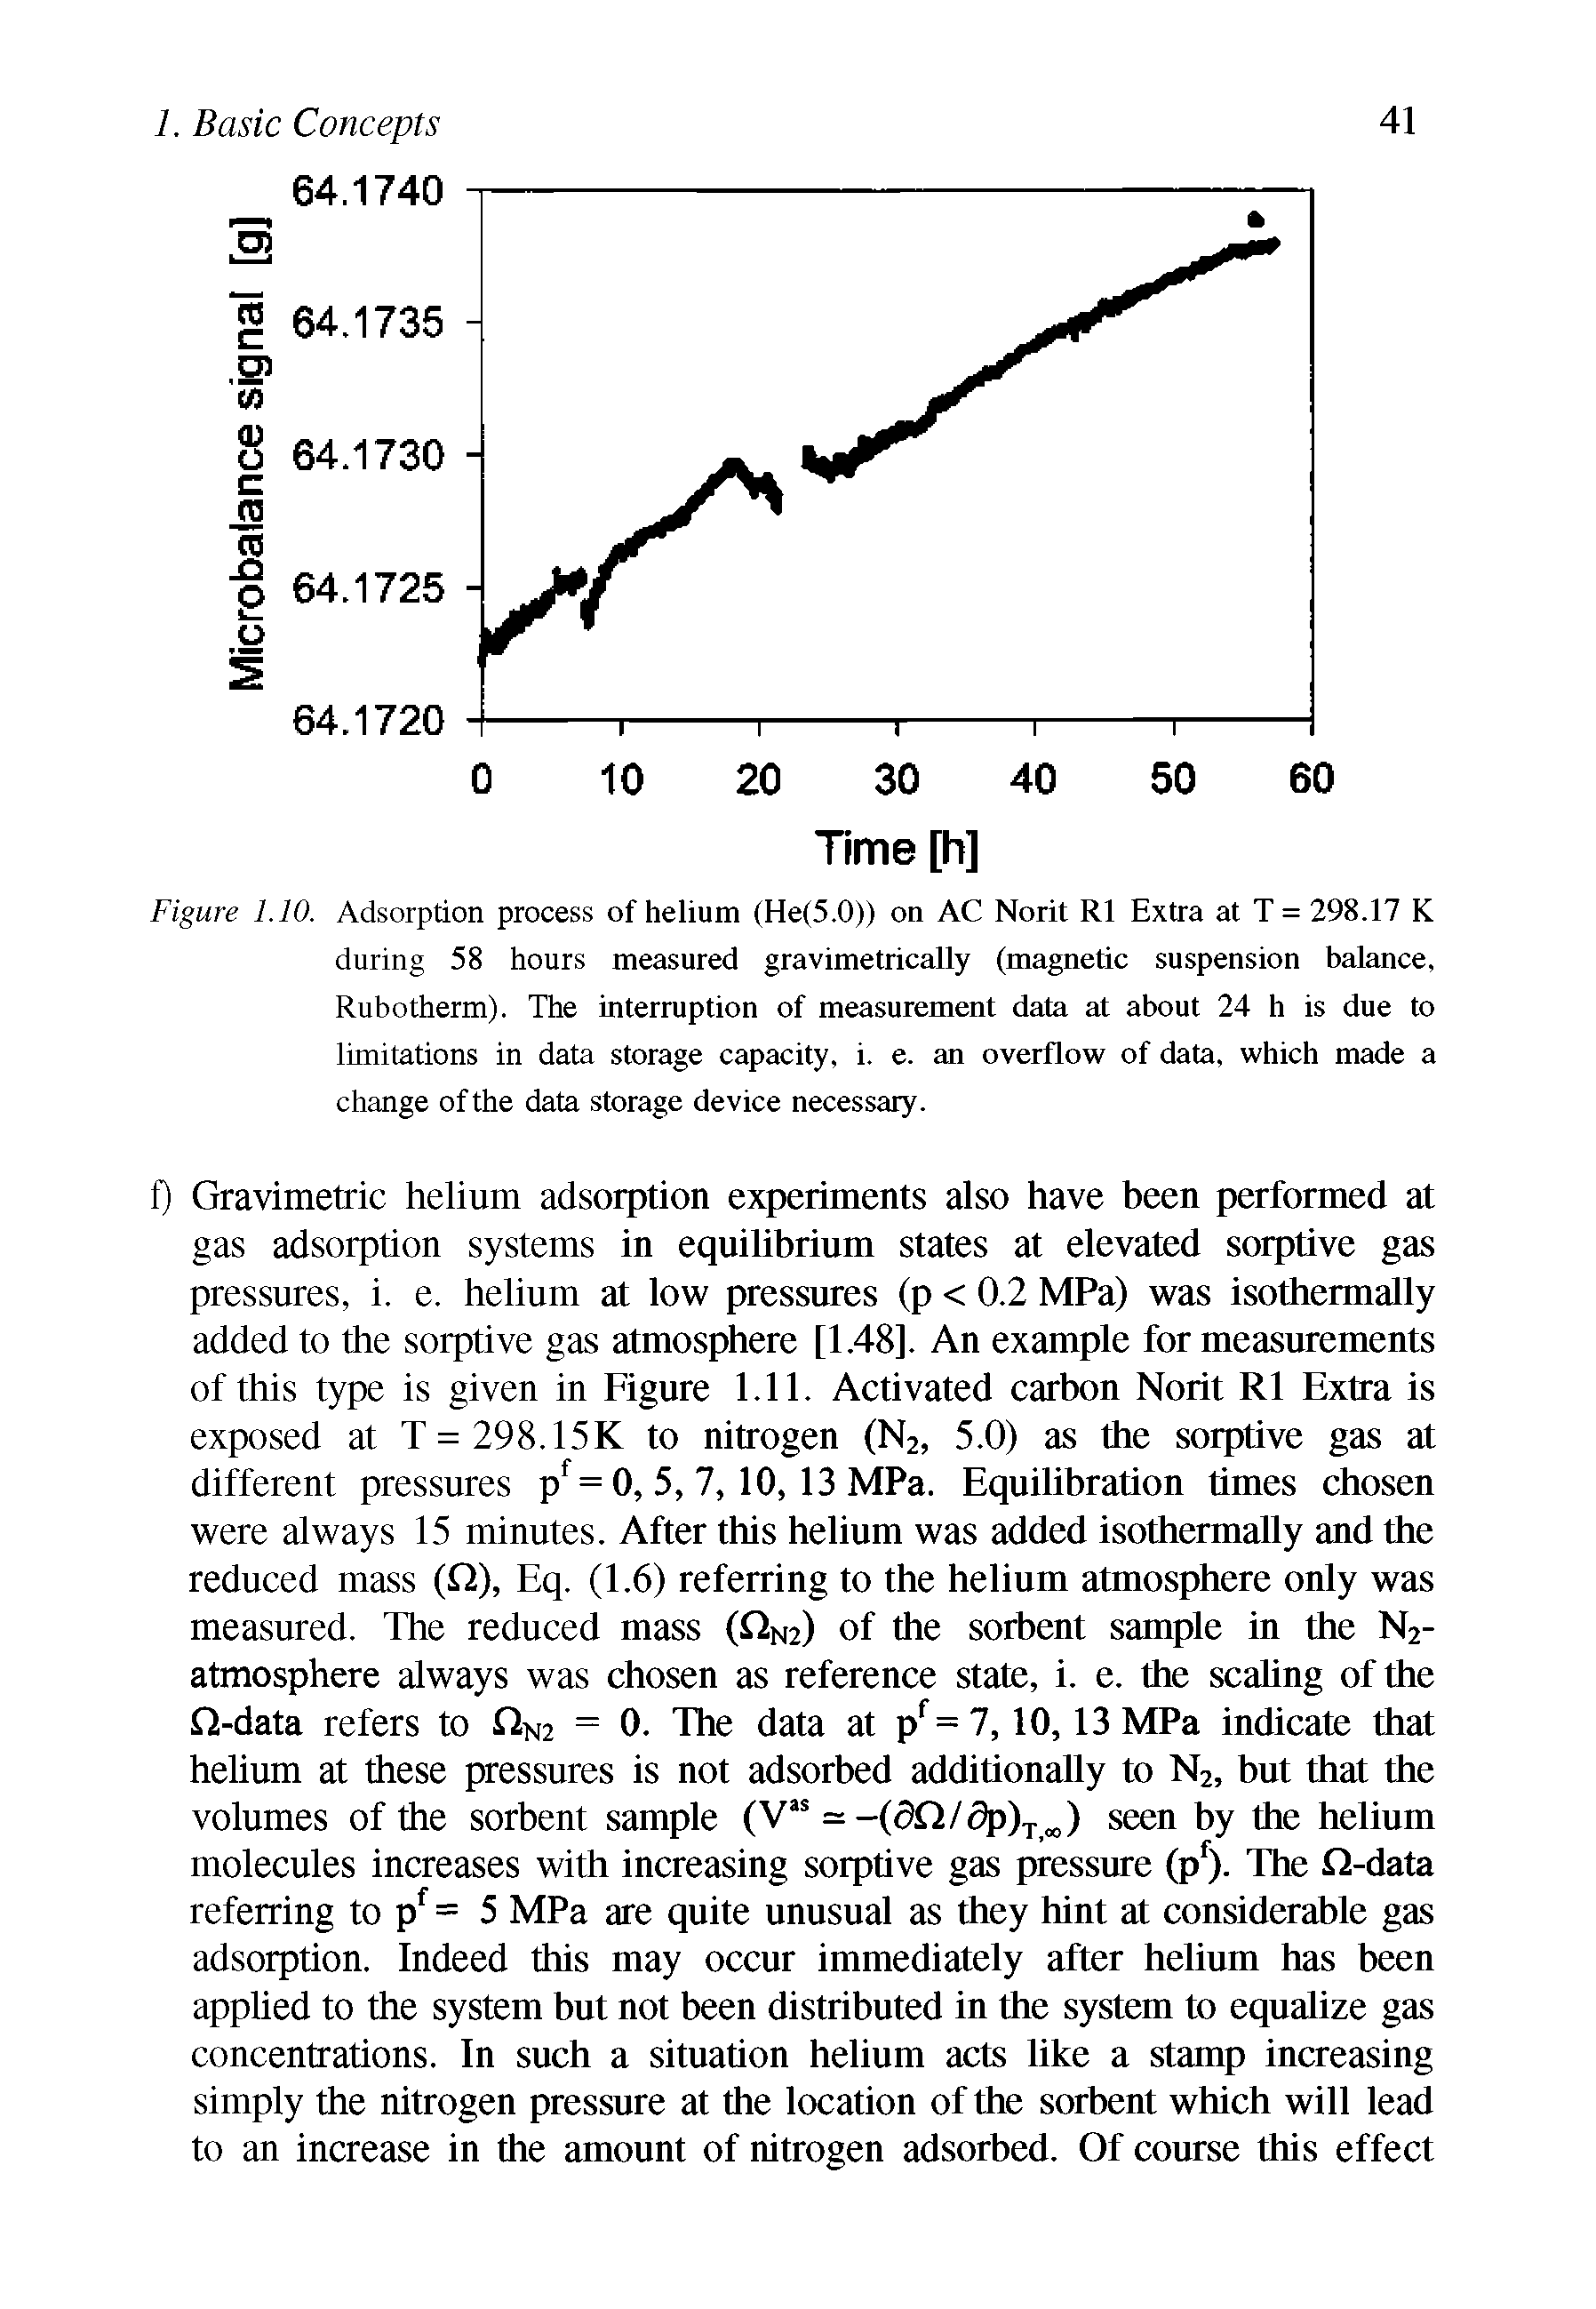 Figure 1.10. Adsorption process of helium (He(5.0)) on AC Norit R1 Extra at T = 298.17 K during 58 hours measured gravimetrically (magnetic suspension balance, Rubotherm). The interruption of measurement data at about 24 h is due to limitations in data storage capacity, i. e. an overflow of data, which made a change of the data storage device necessary.